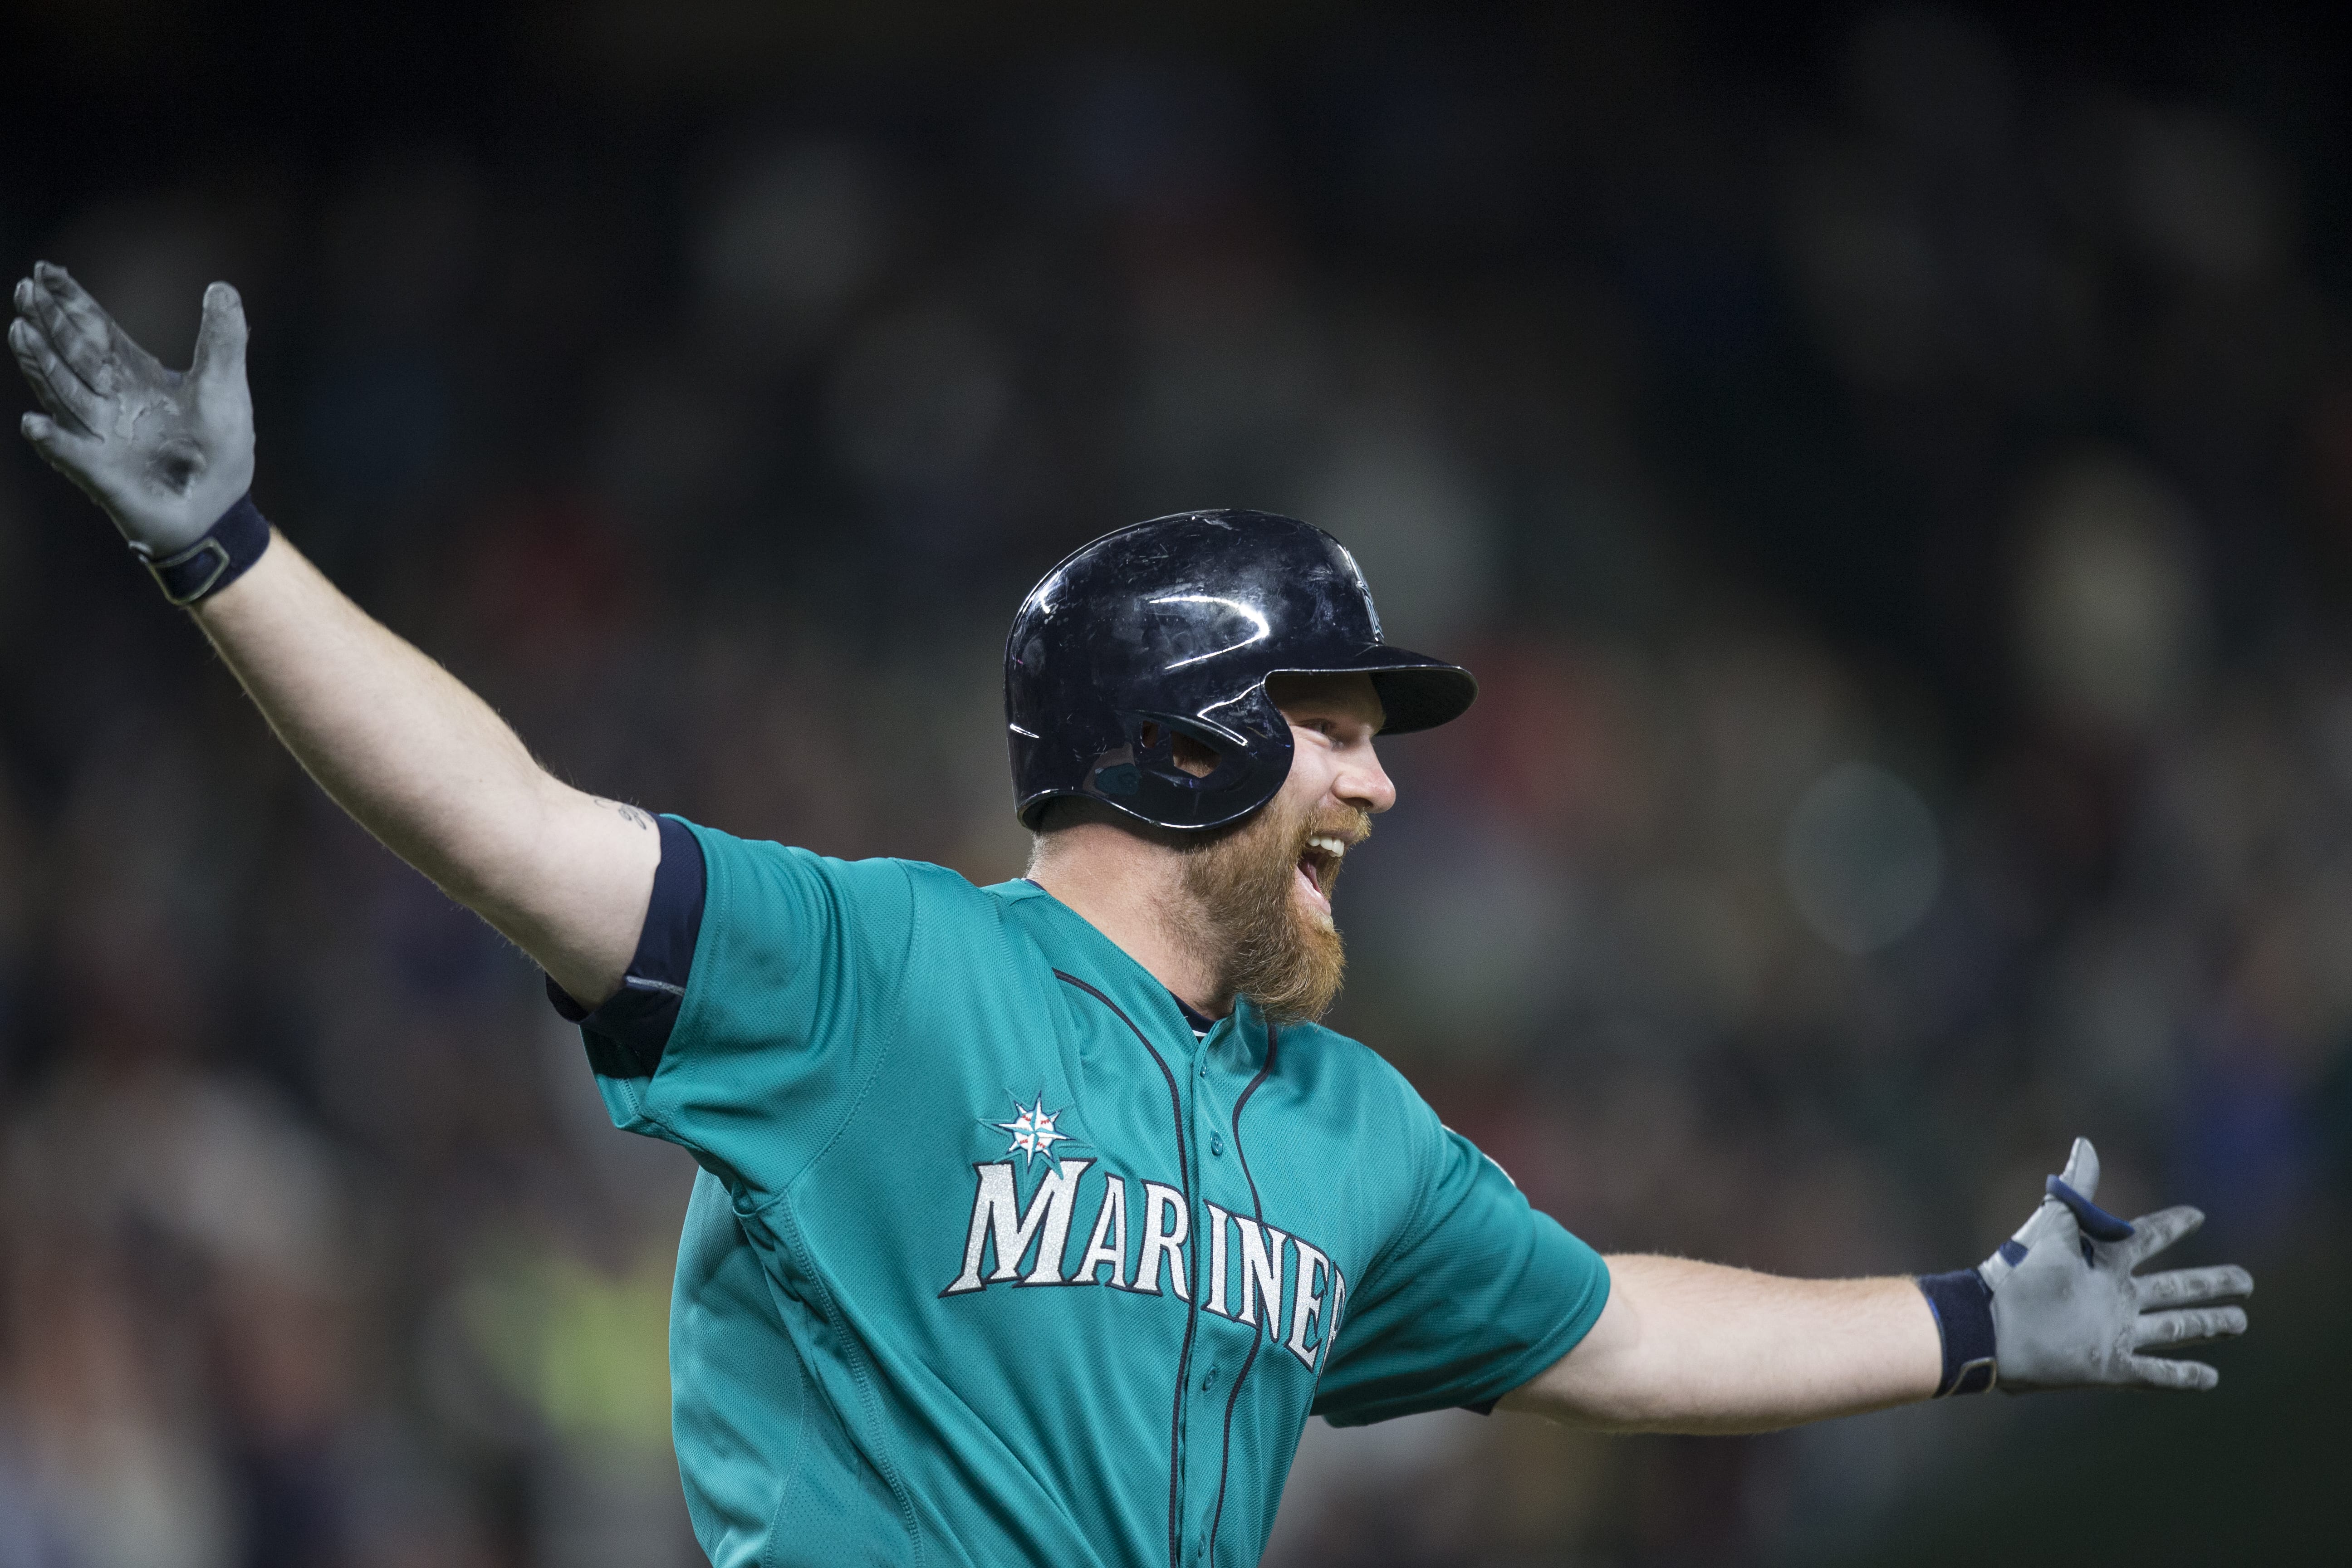 Seattle Mariners' Adam Lind celebrates his three-run home run off of St. Louis Cardinals relief pitcher Trevor Rosenthal during the ninth inning of a baseball game, Friday, June 24, 2016, in Seattle. The Mariners won 4-3.